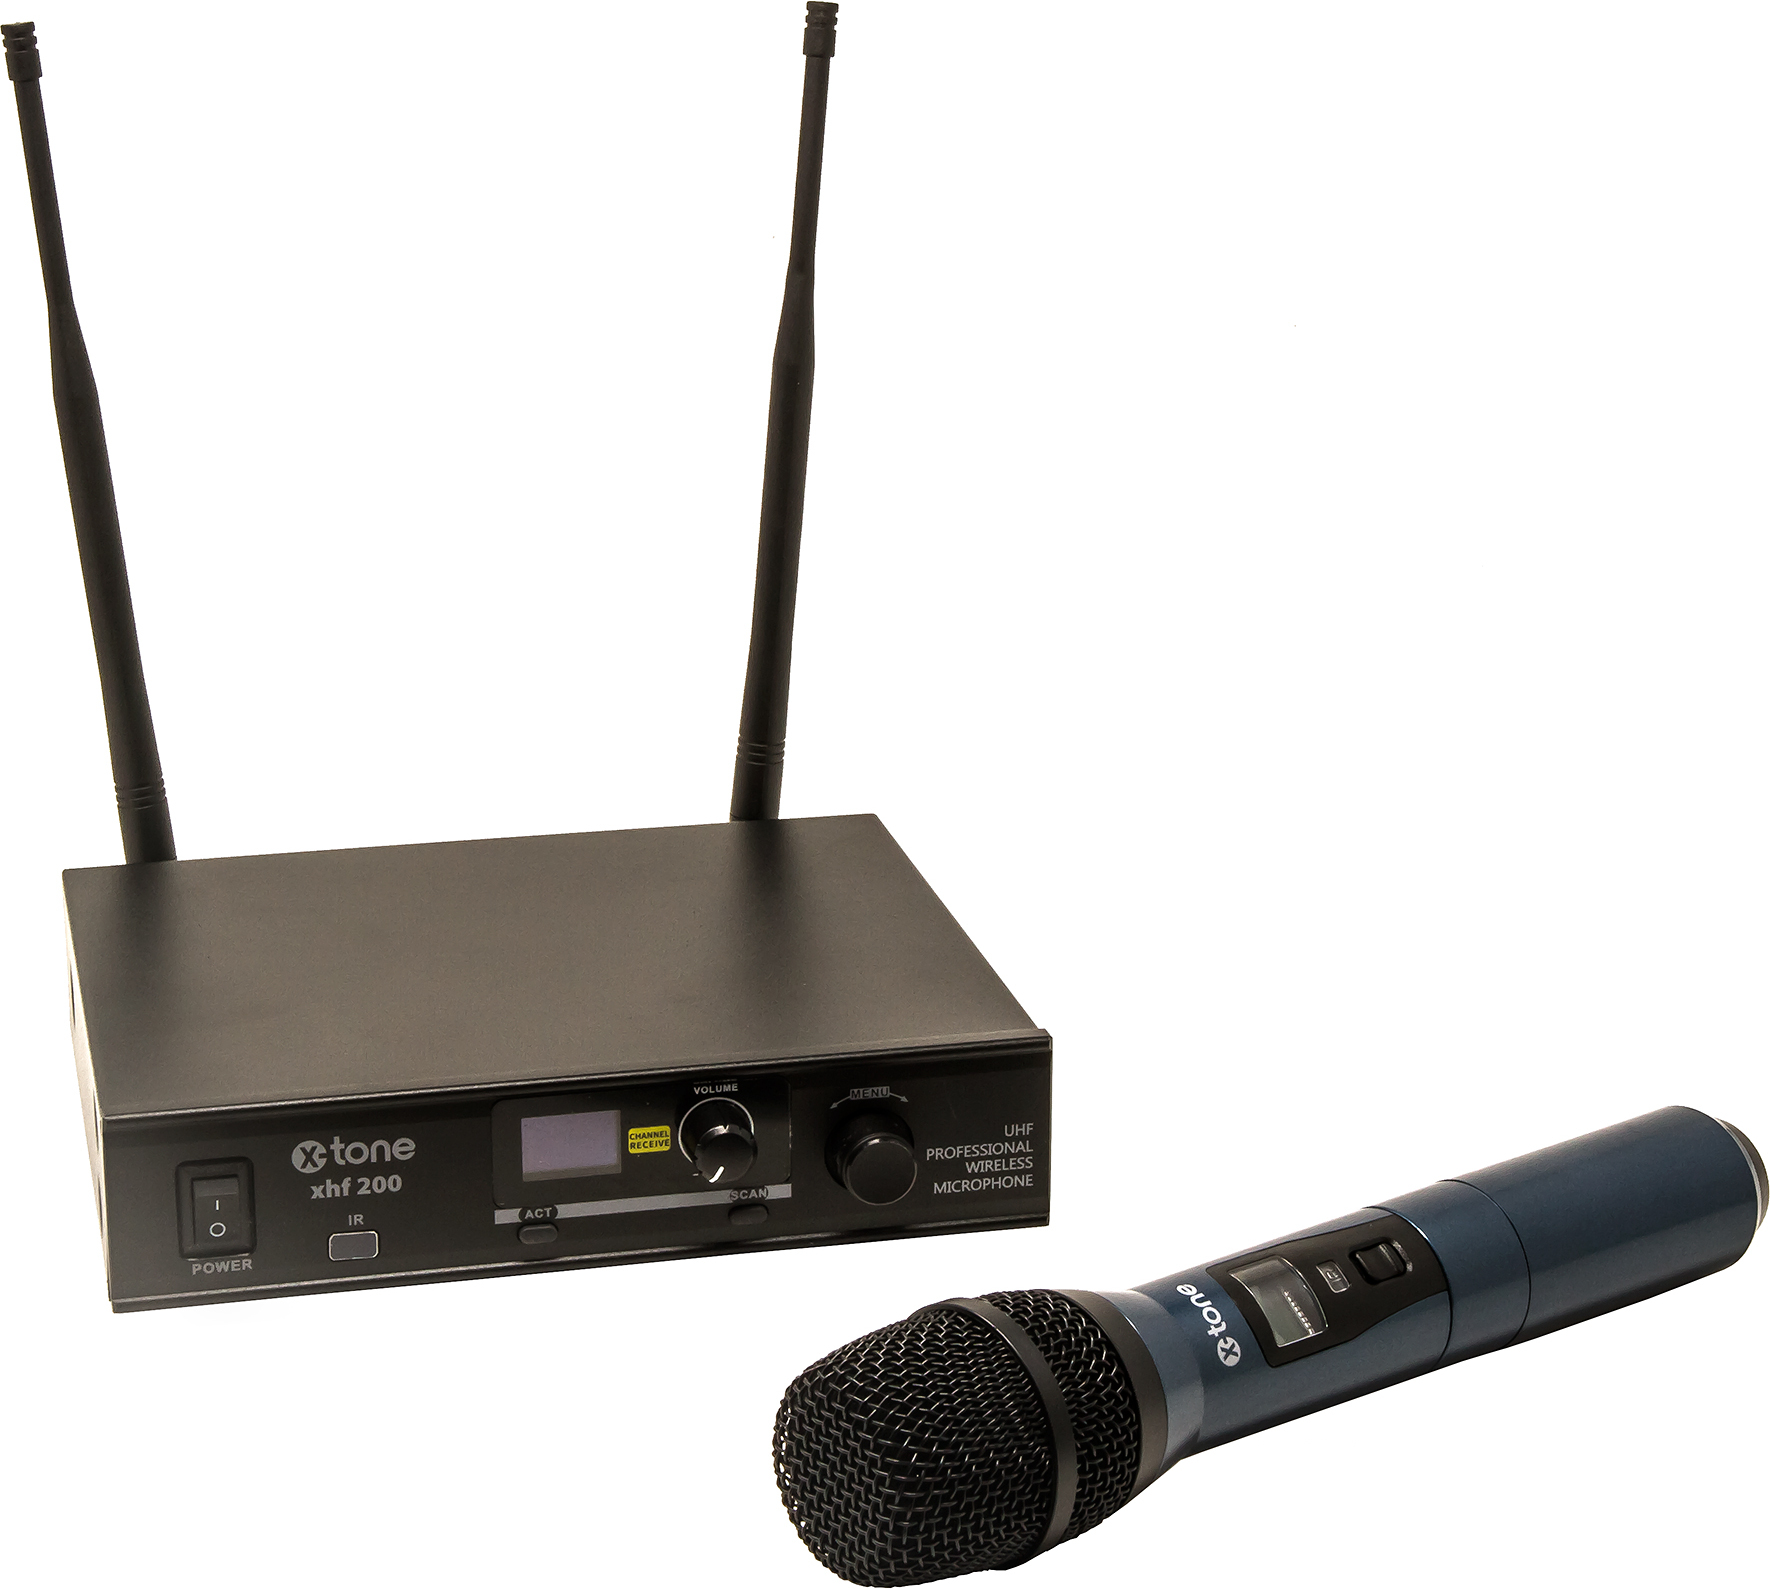 X-tone Xhf200 Systeme Hf Main Multi Frequences - Wireless handheld microphone - Main picture